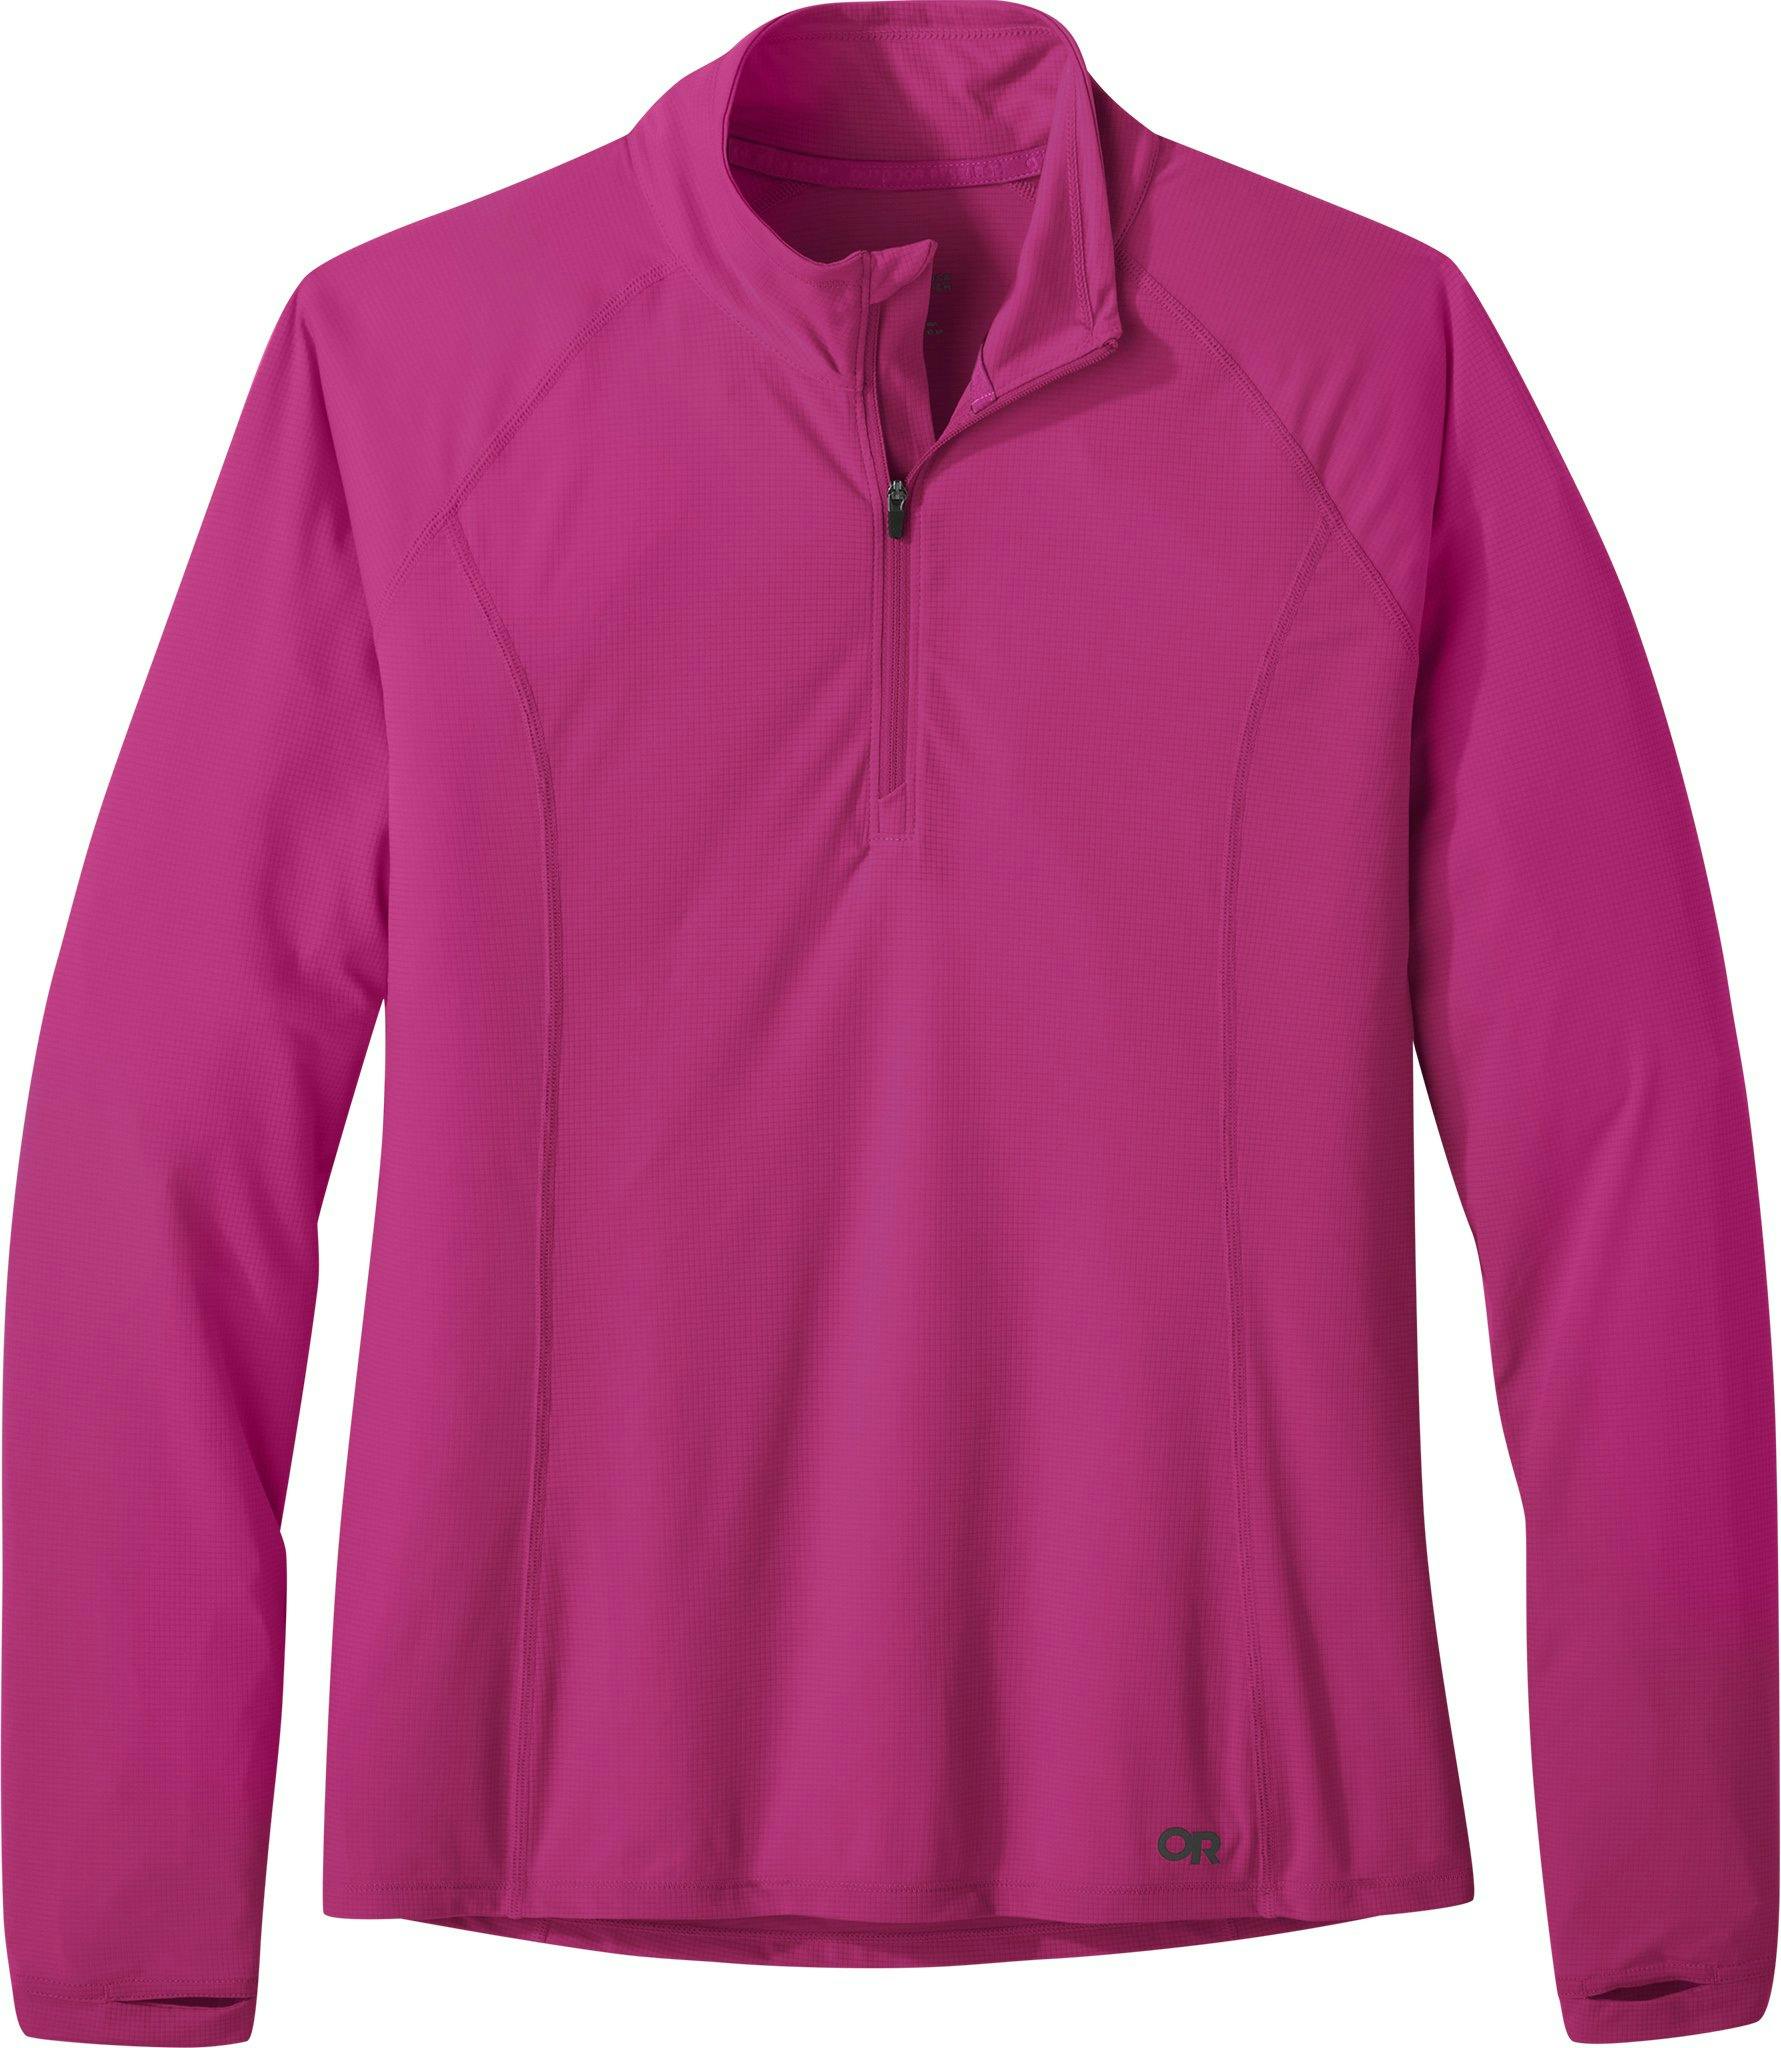 Product image for Echo Quarter Zip Pullover - Women's